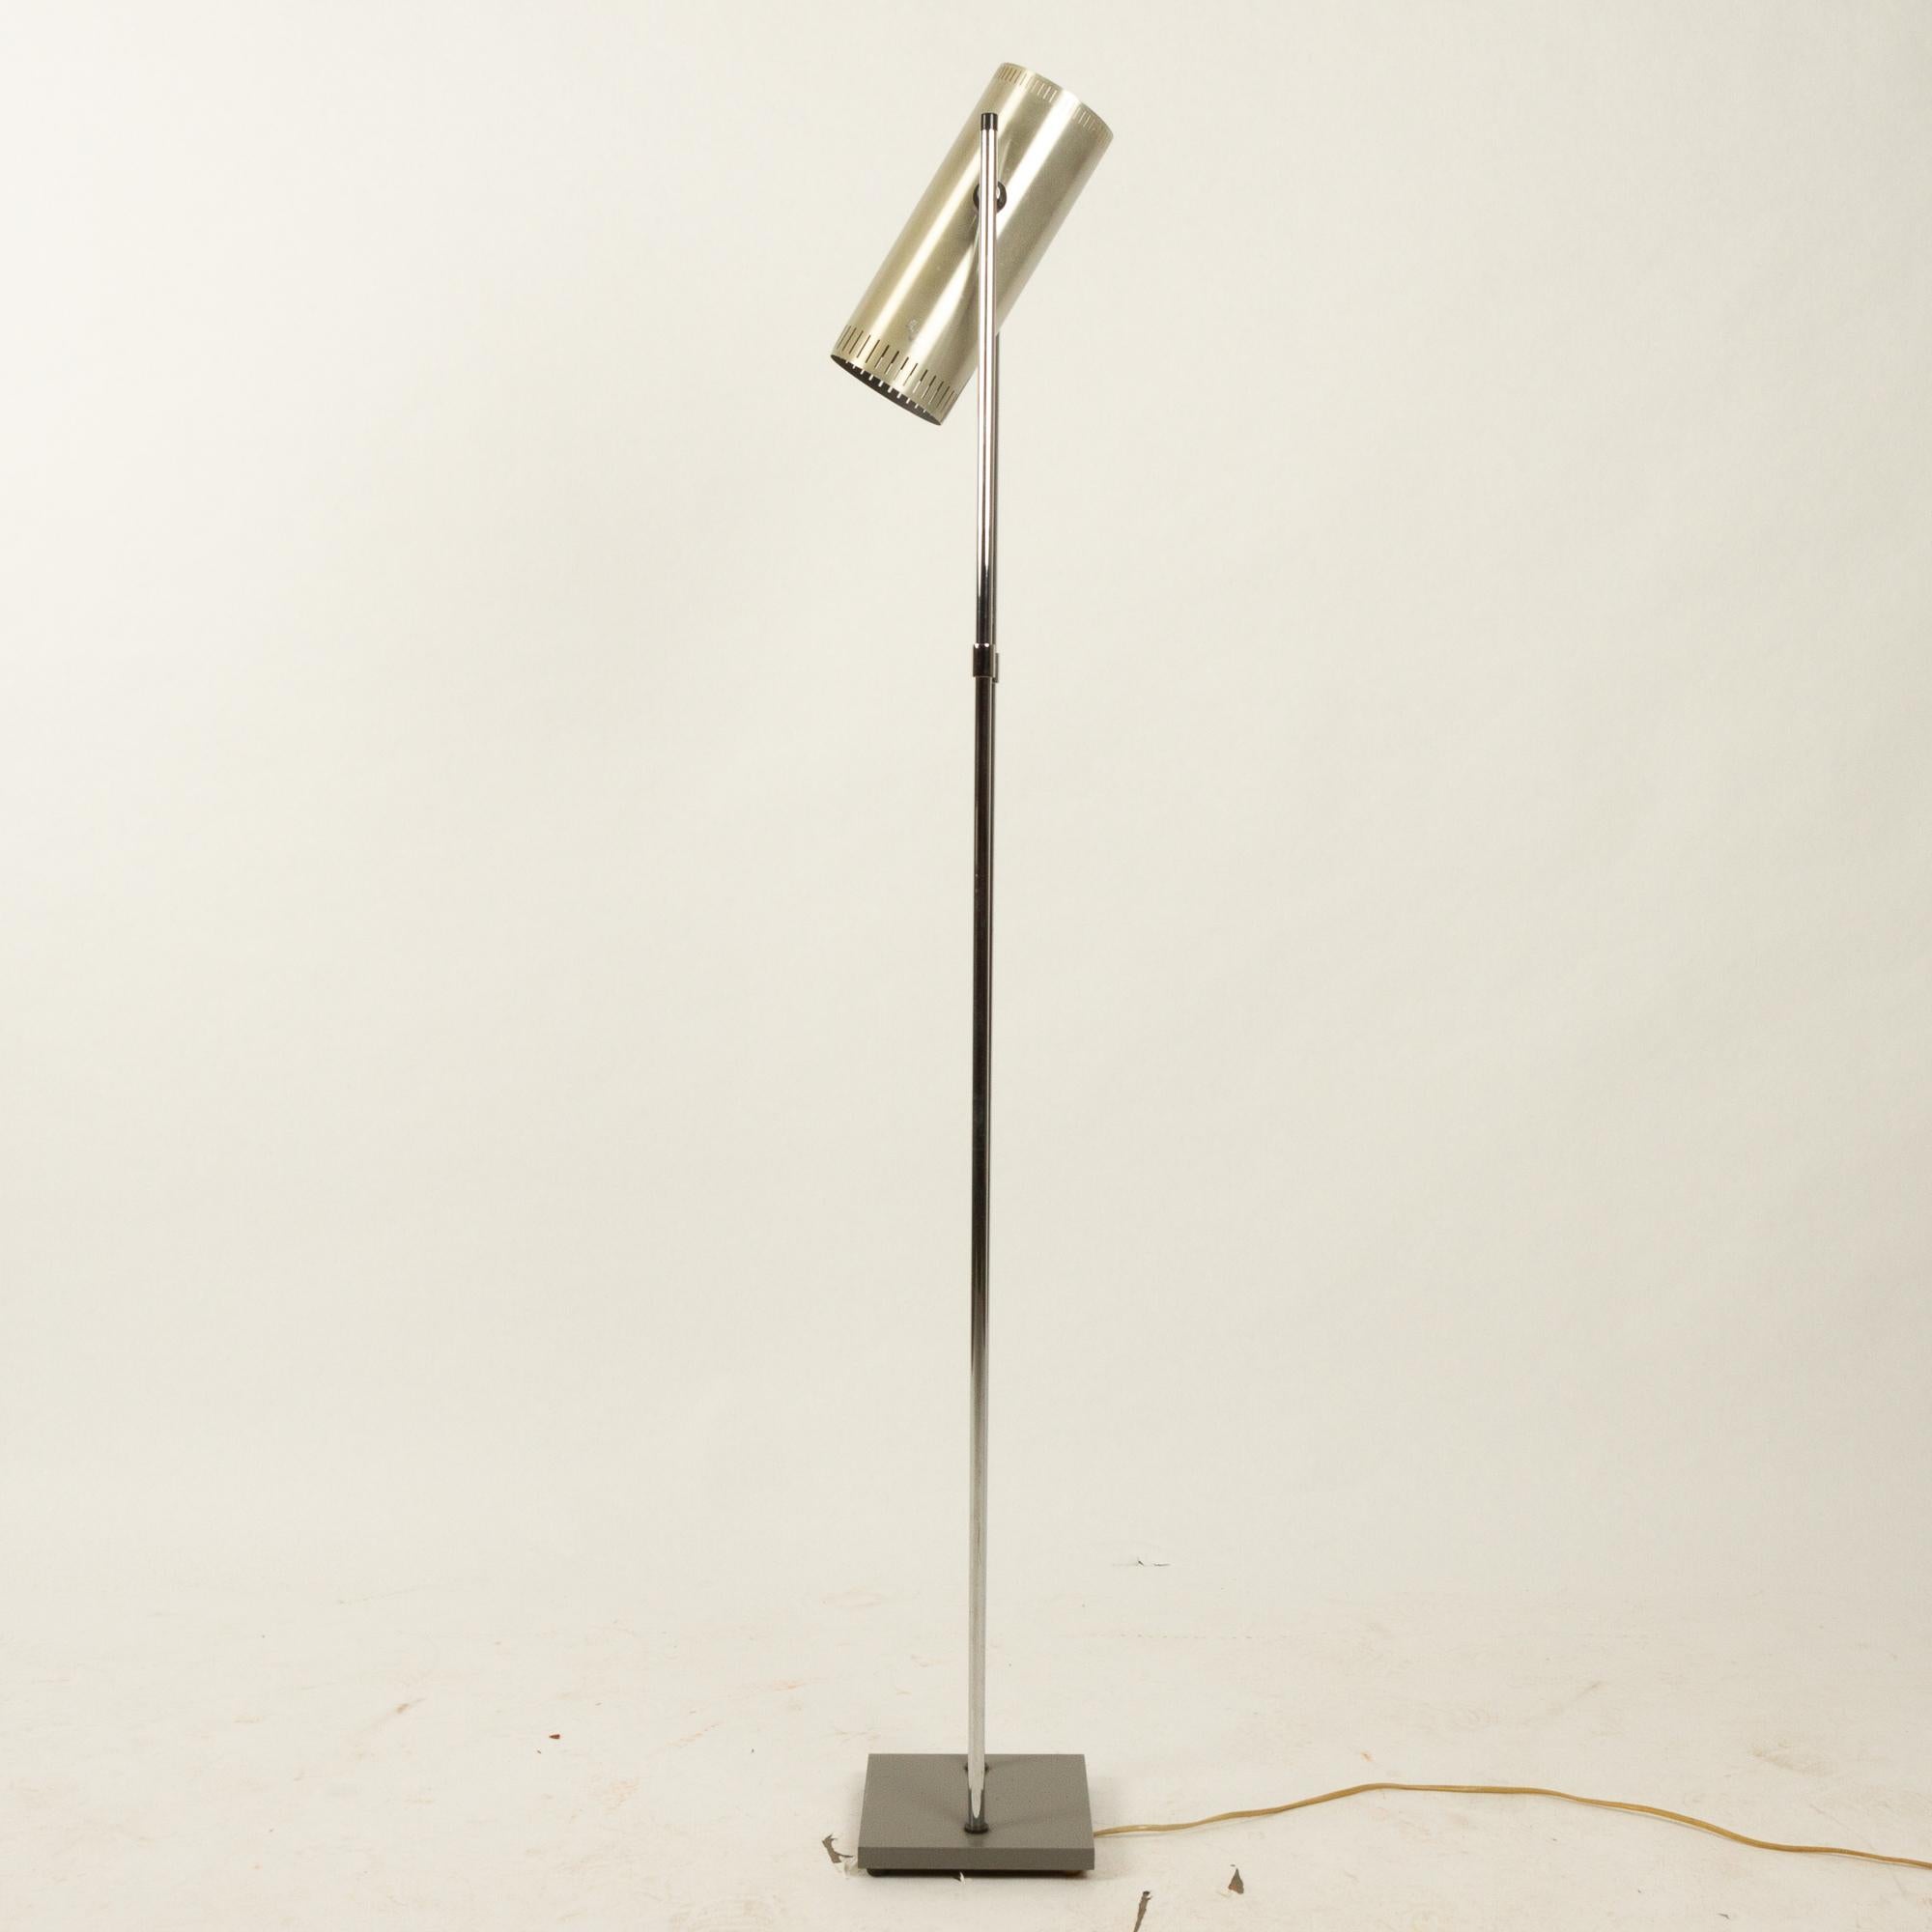 Trombone floor lamp by Jo Hammerborg for Fog & Mørup, 1960s.
Danish Mid-Century Modern tall floor lamp in lacquered aluminium and chrome. Cylindrical head with row of slits along bottom and top. Switch on top. Angel of head is adjustable. Two